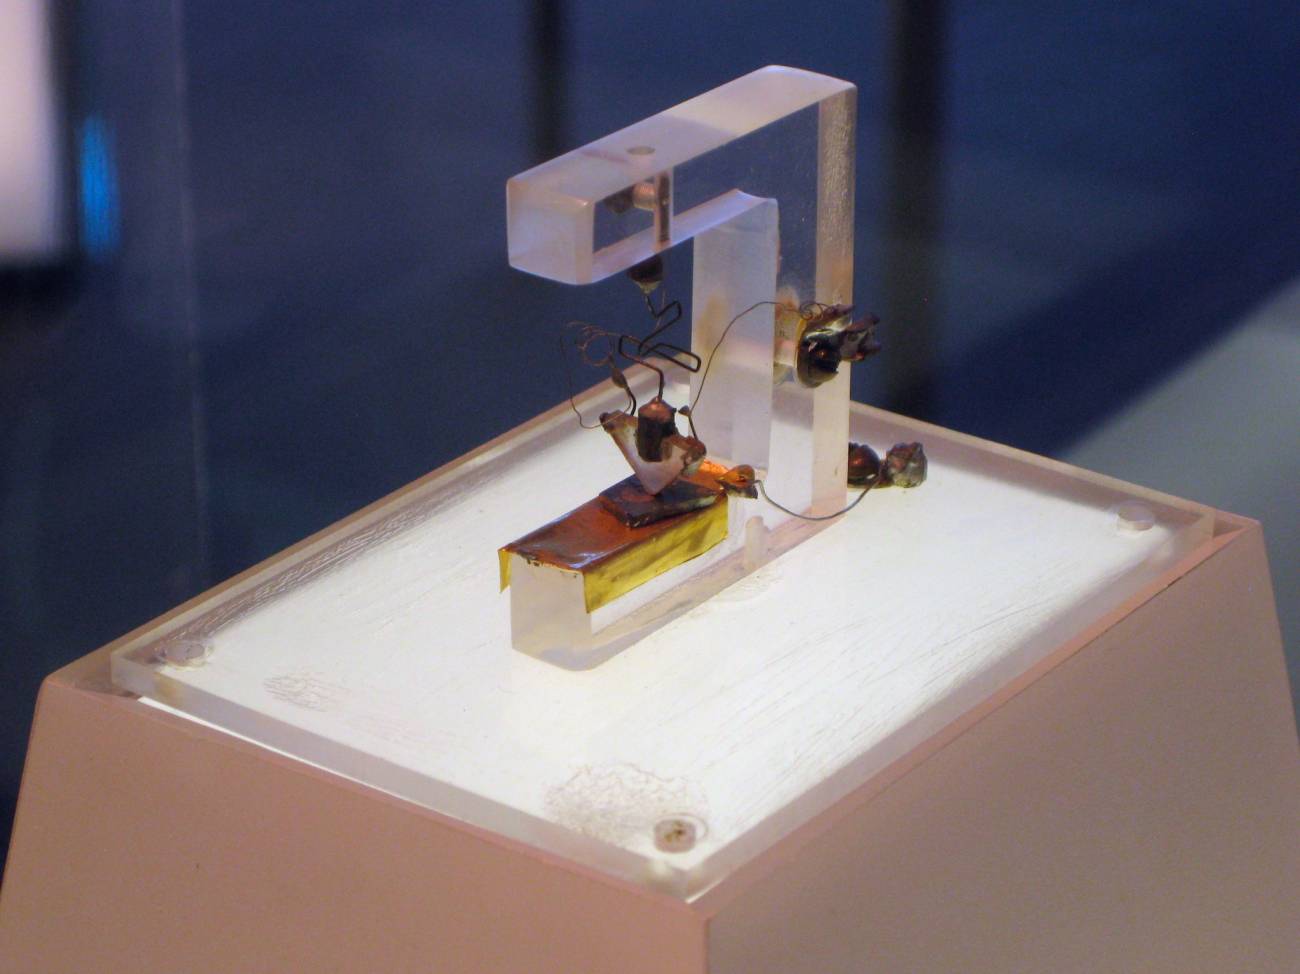 The First Transistor ever made built in 1947 Bell Labs